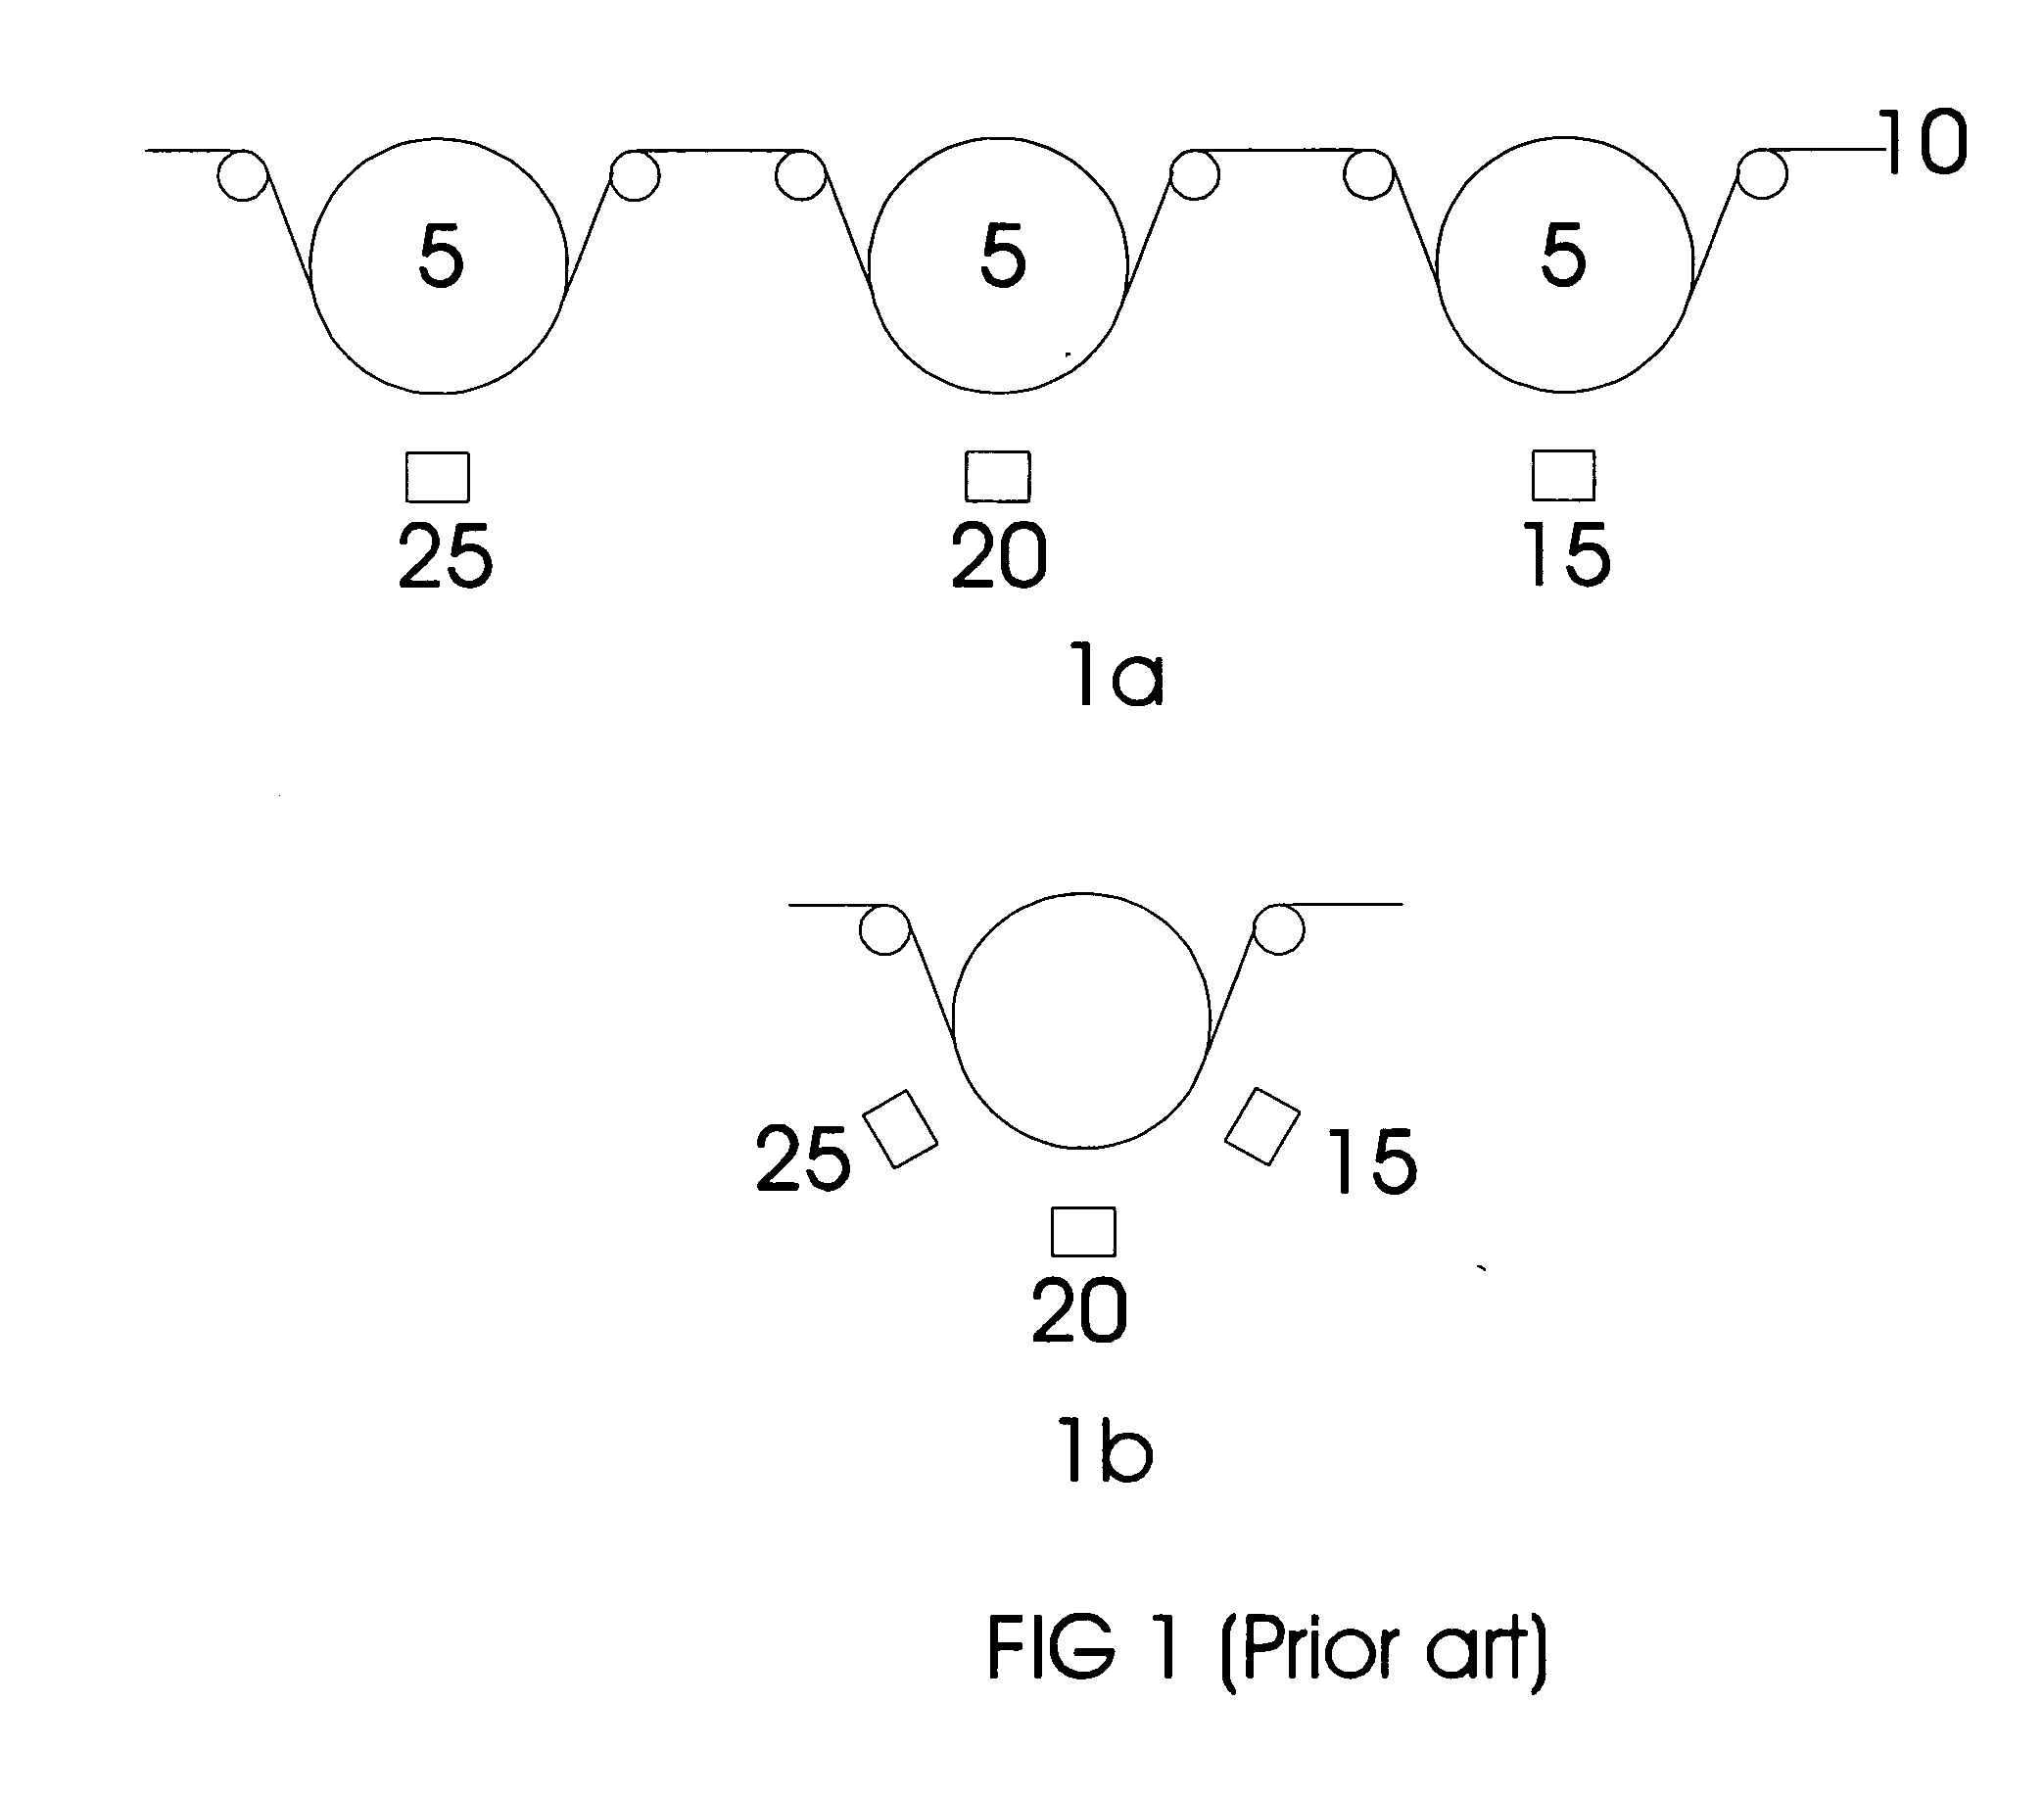 Producing repetitive coatings on a flexible substrate